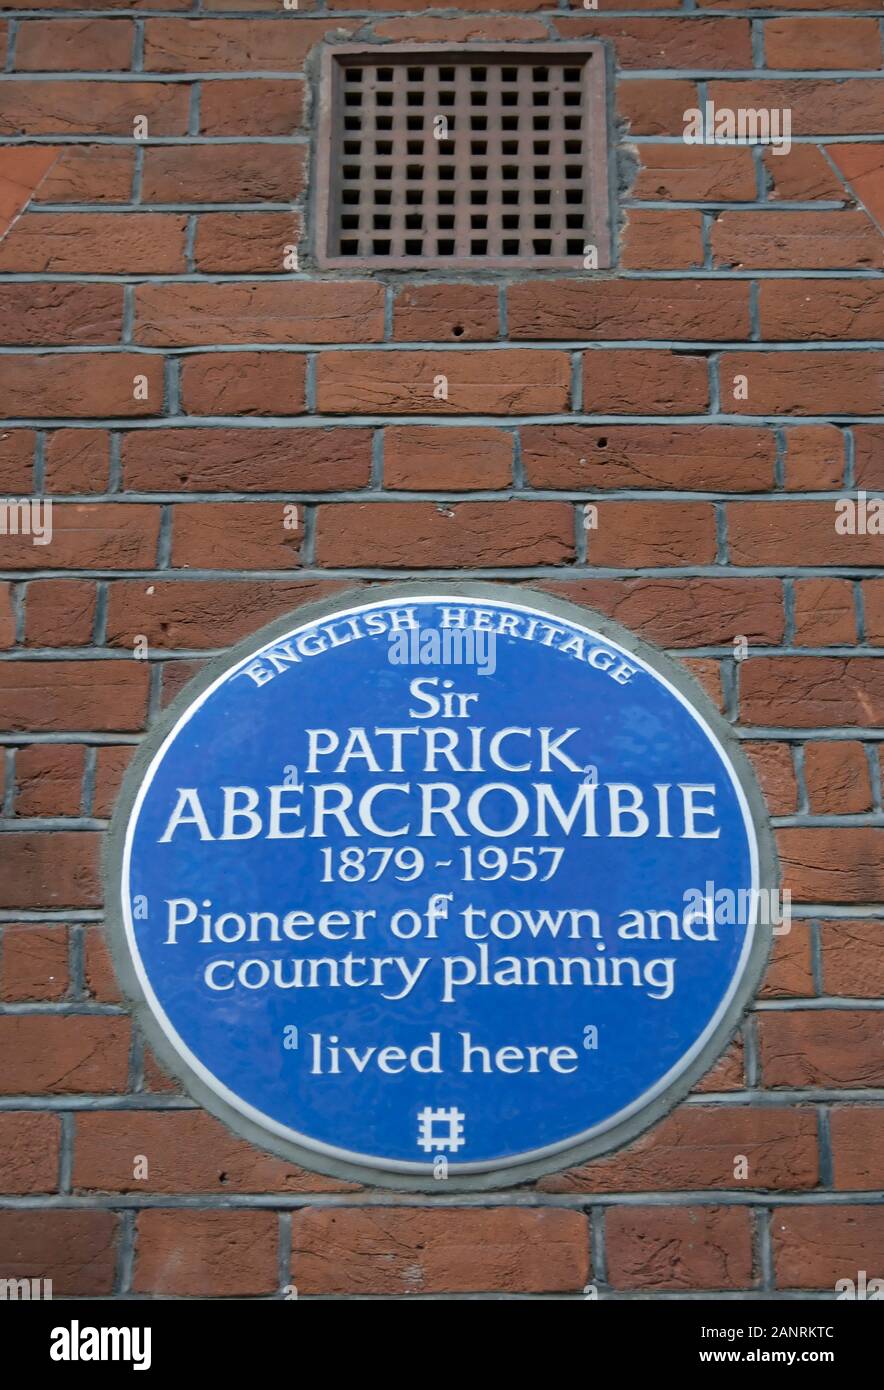 english heritage blue plaque marking a home of town and country planning pioneer, sir patrick abercrombie, south kensington, london, england Stock Photo